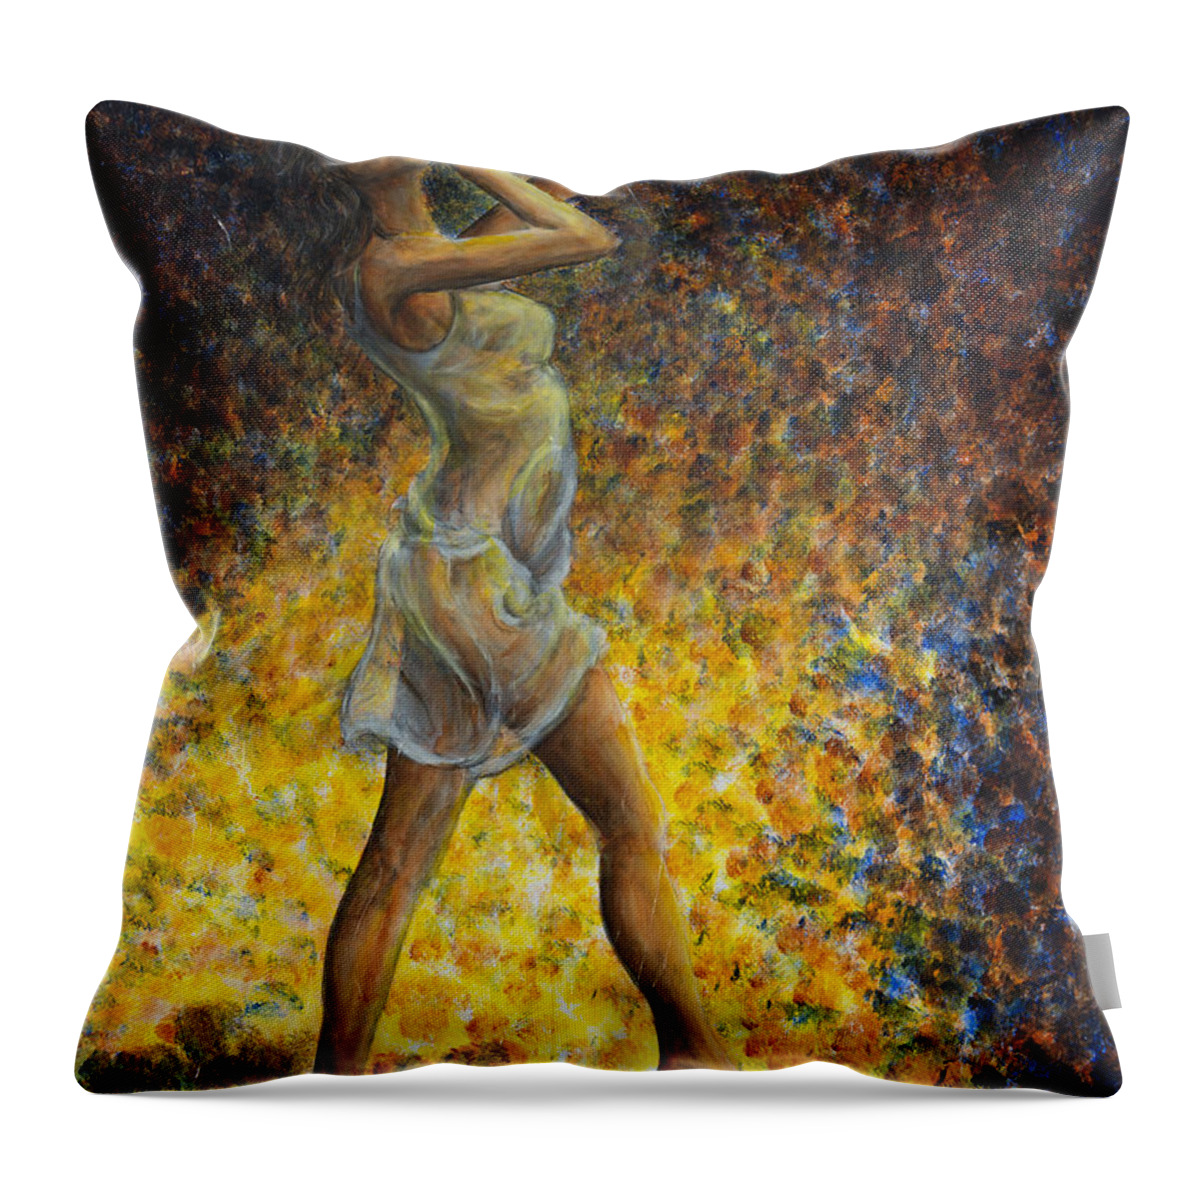 Dancer Throw Pillow featuring the painting Dancer 07 by Nik Helbig